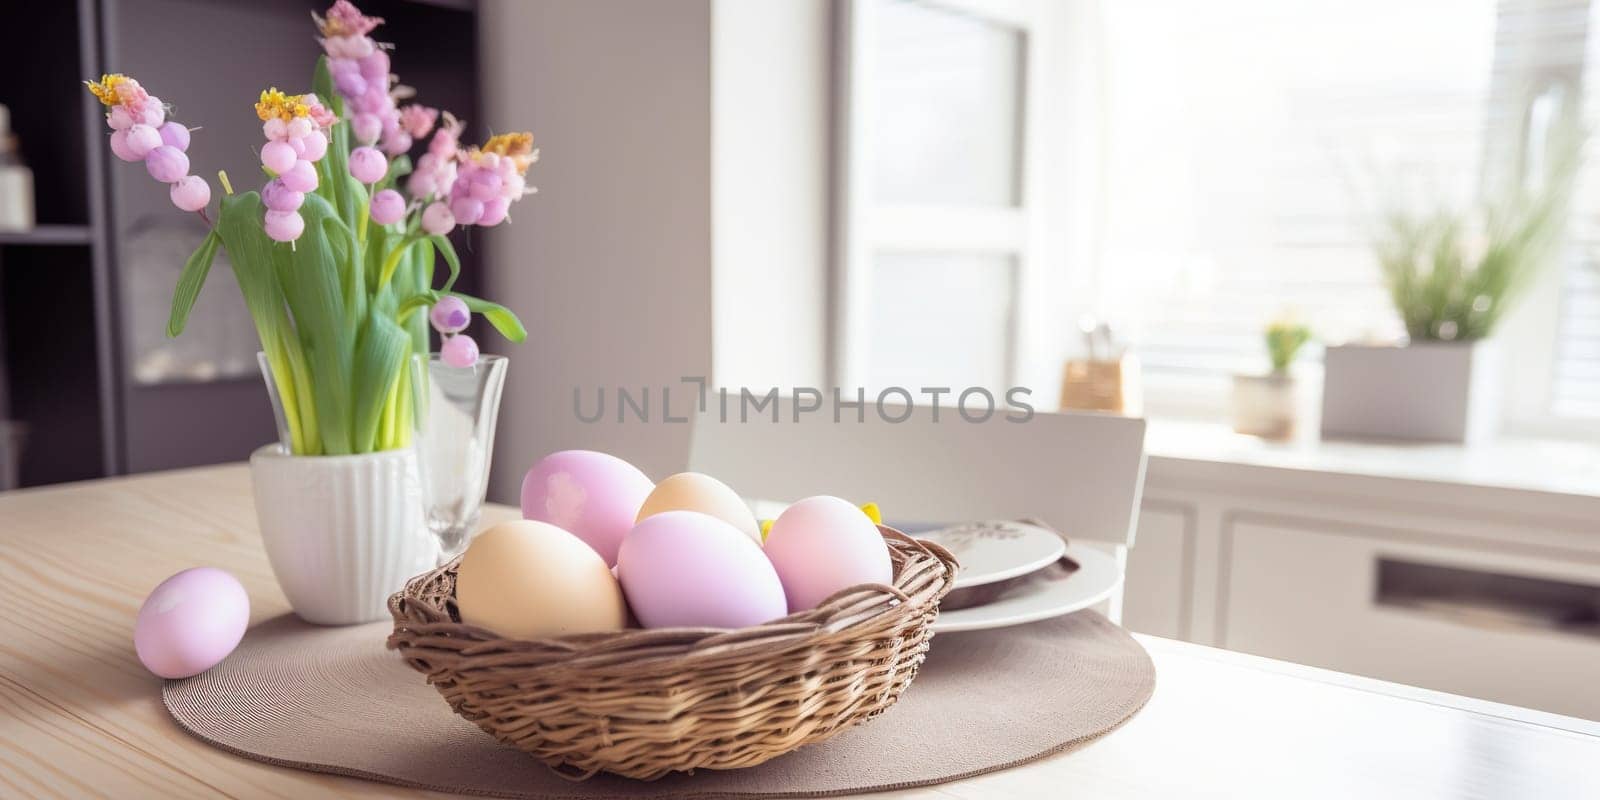 Painted Easter eggs in a wicker basket on the kitchen table with flowers